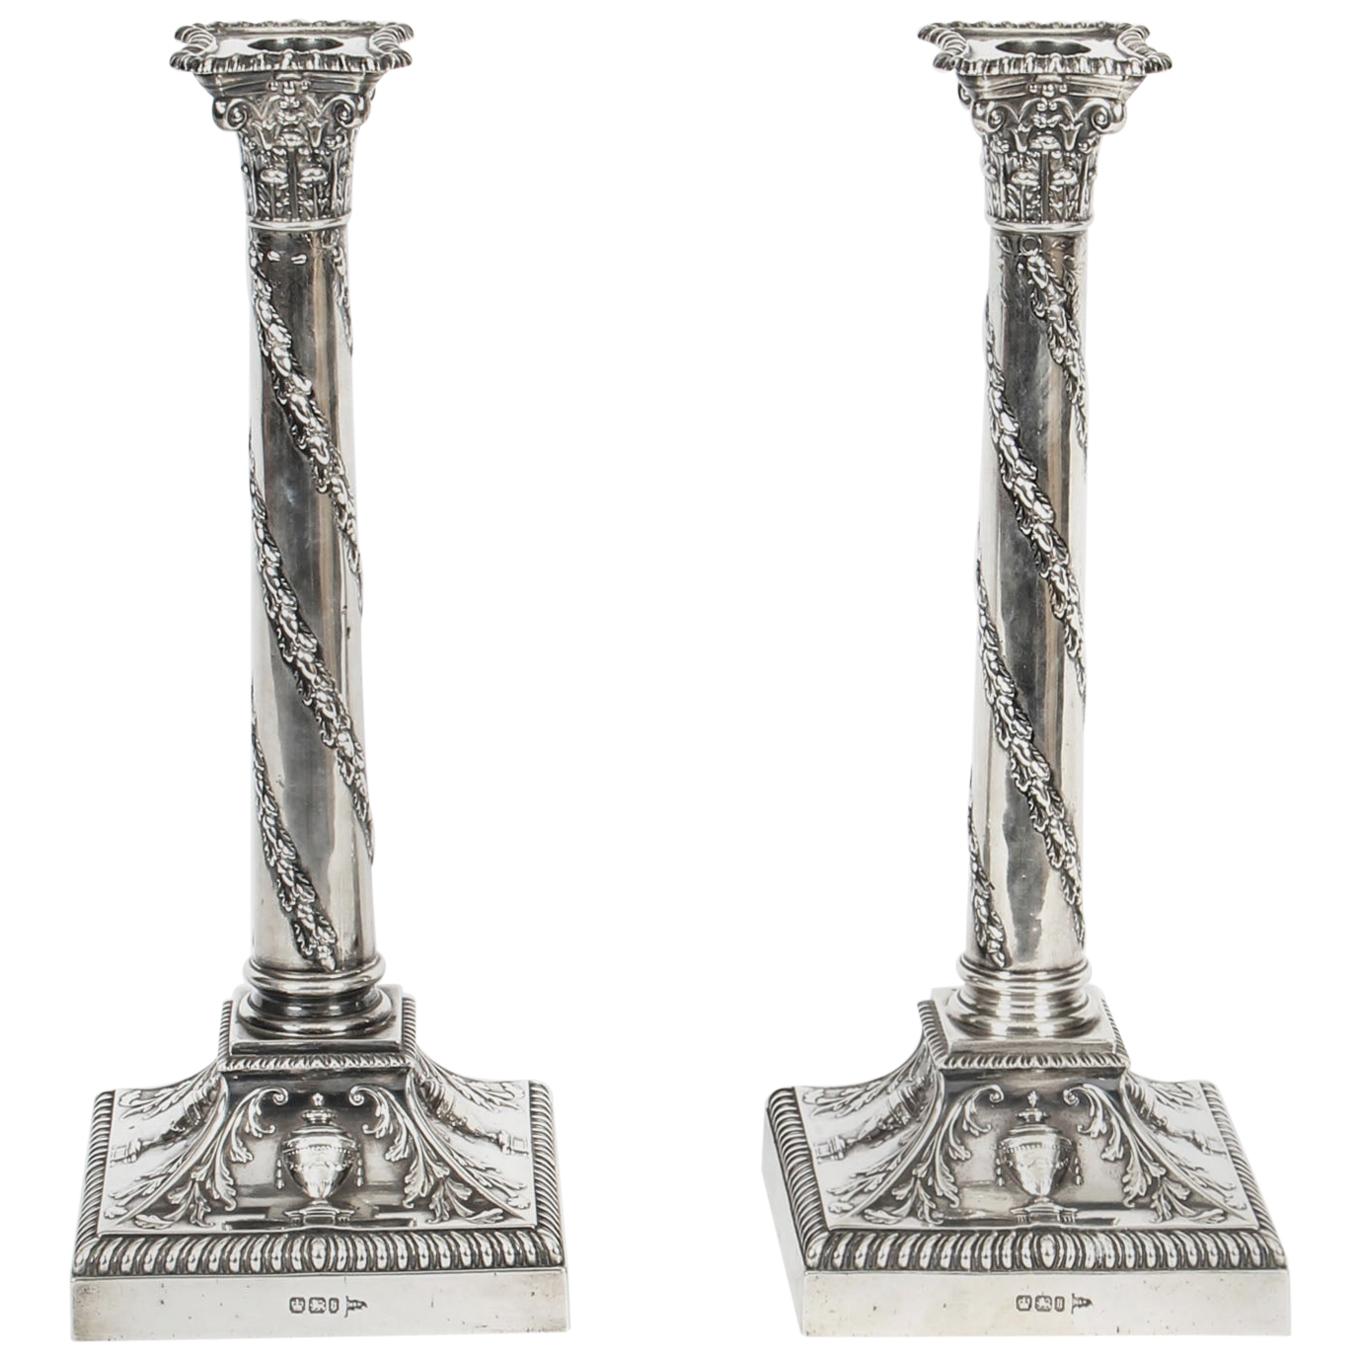 Antique Pair of Sterling Silver Candlesticks Walker and Hall, 1900